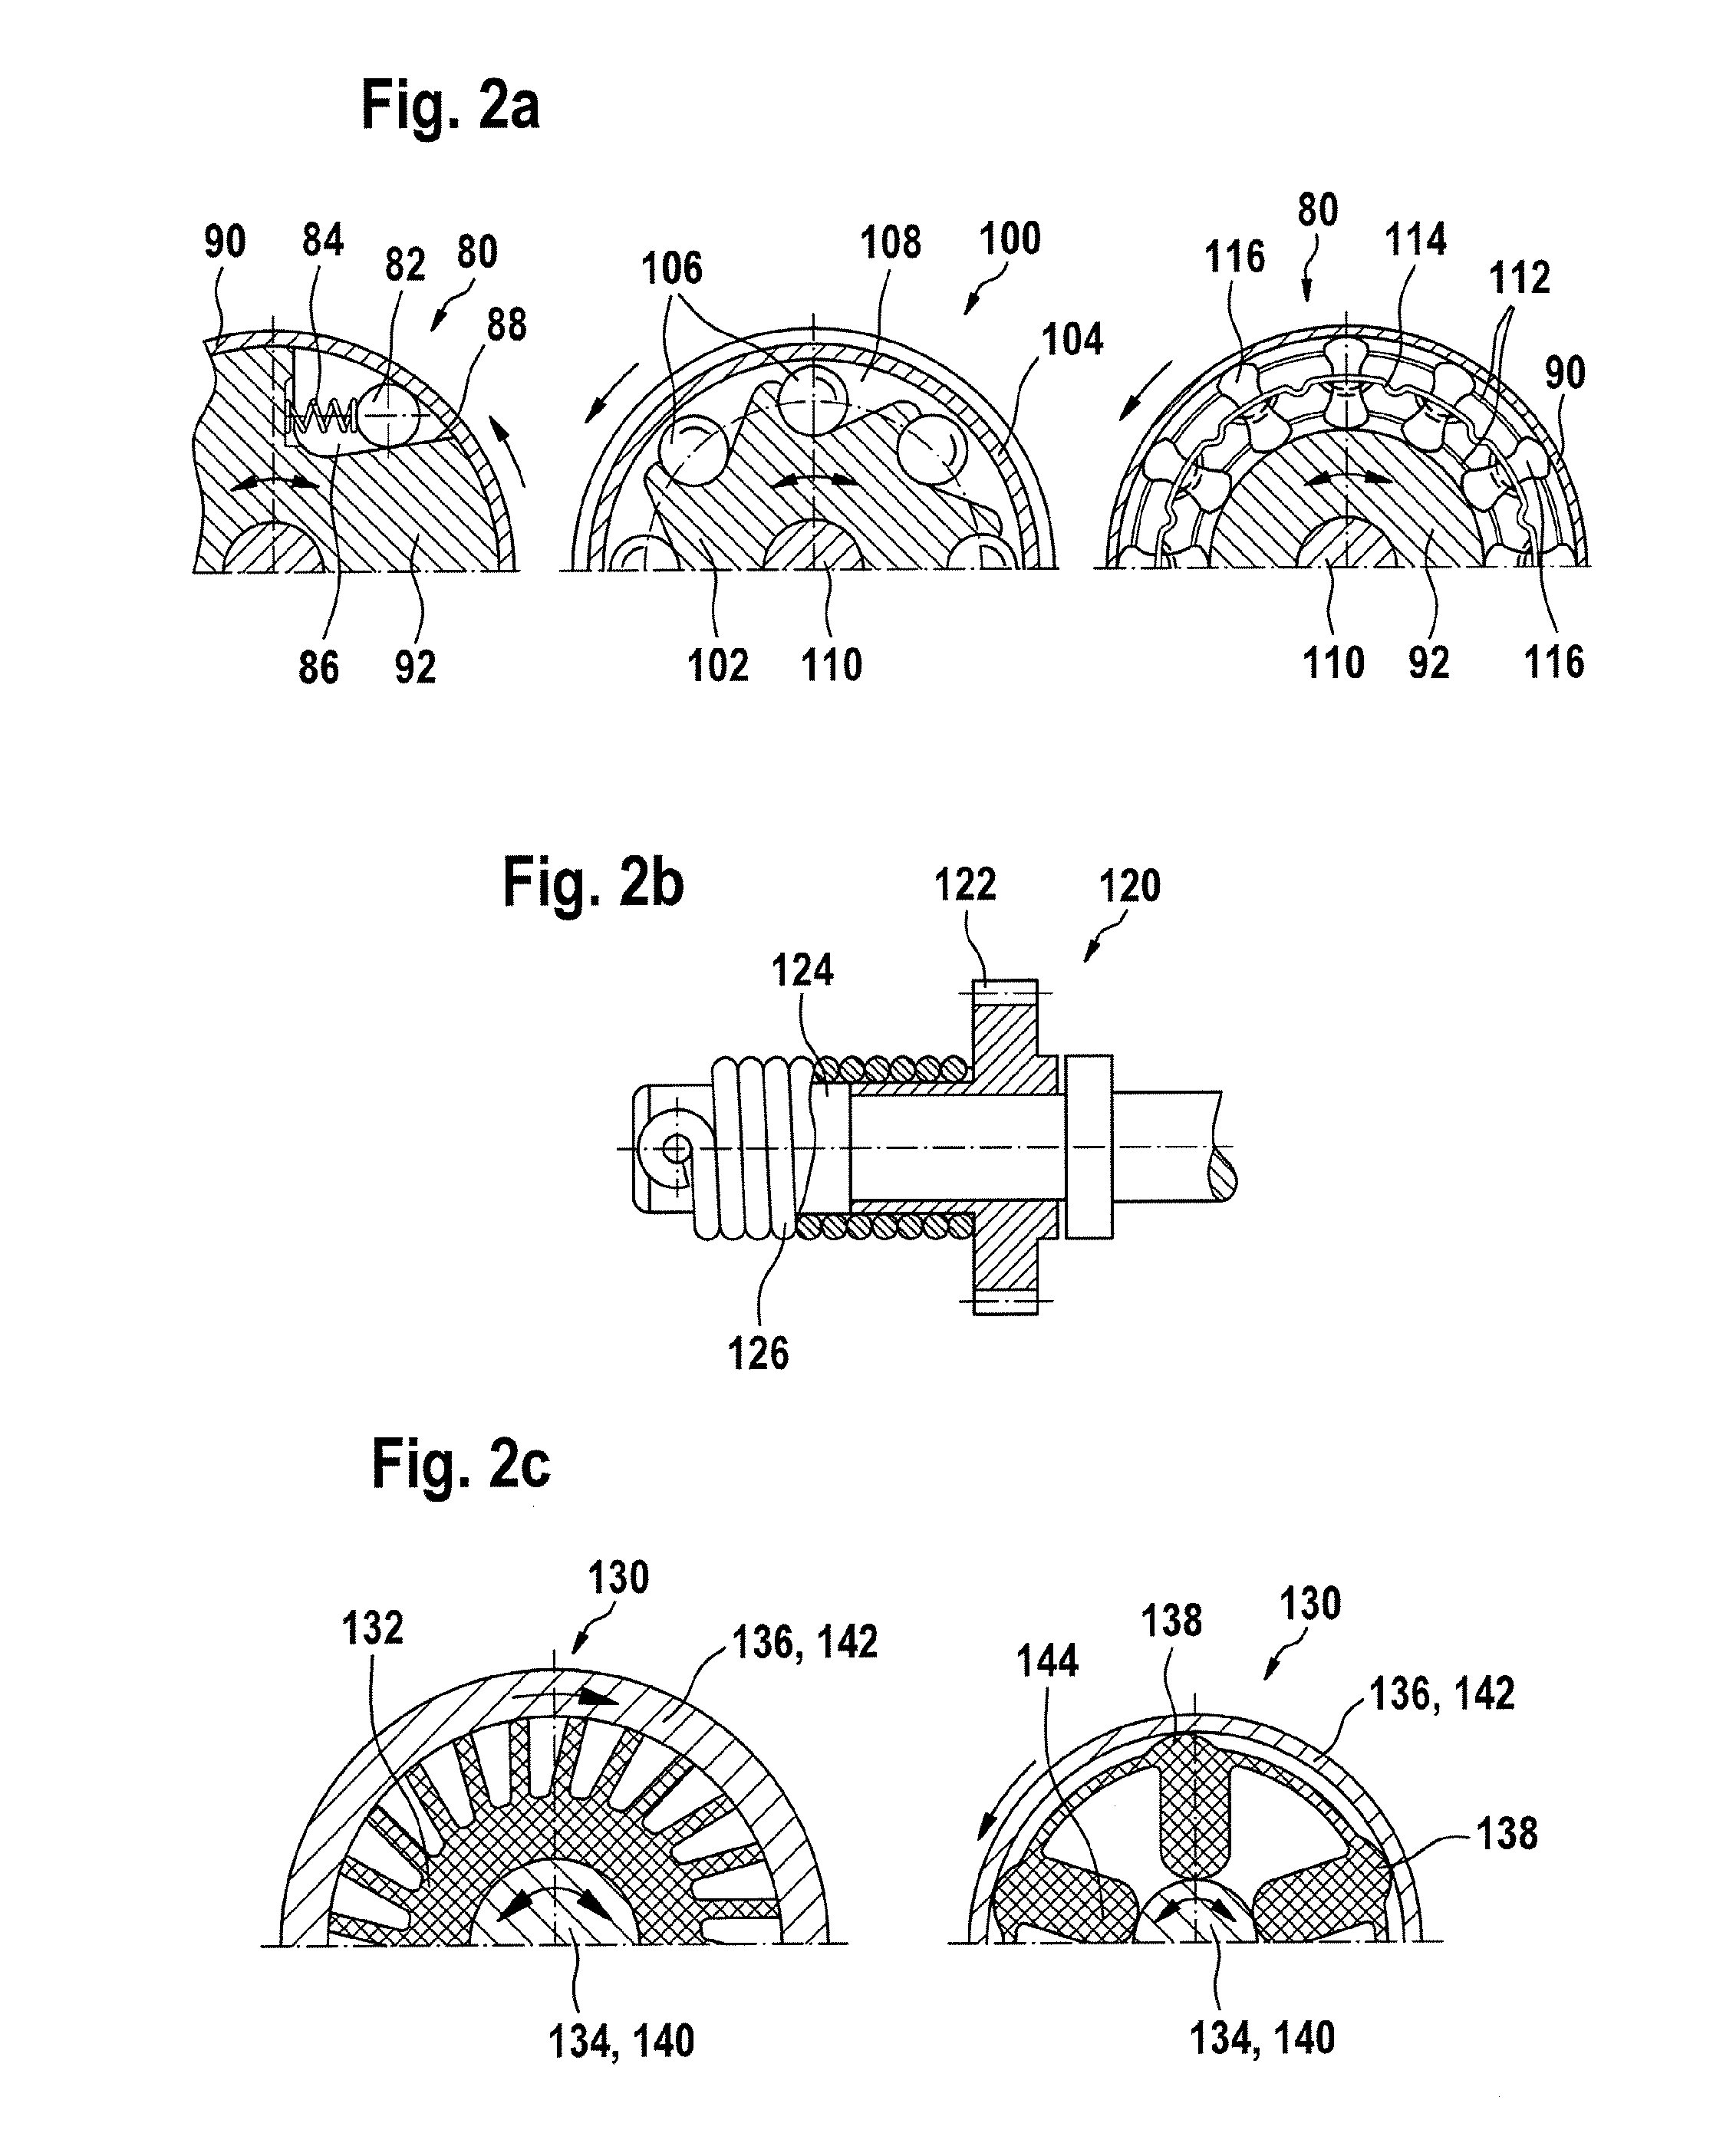 Drive unit for medical devices